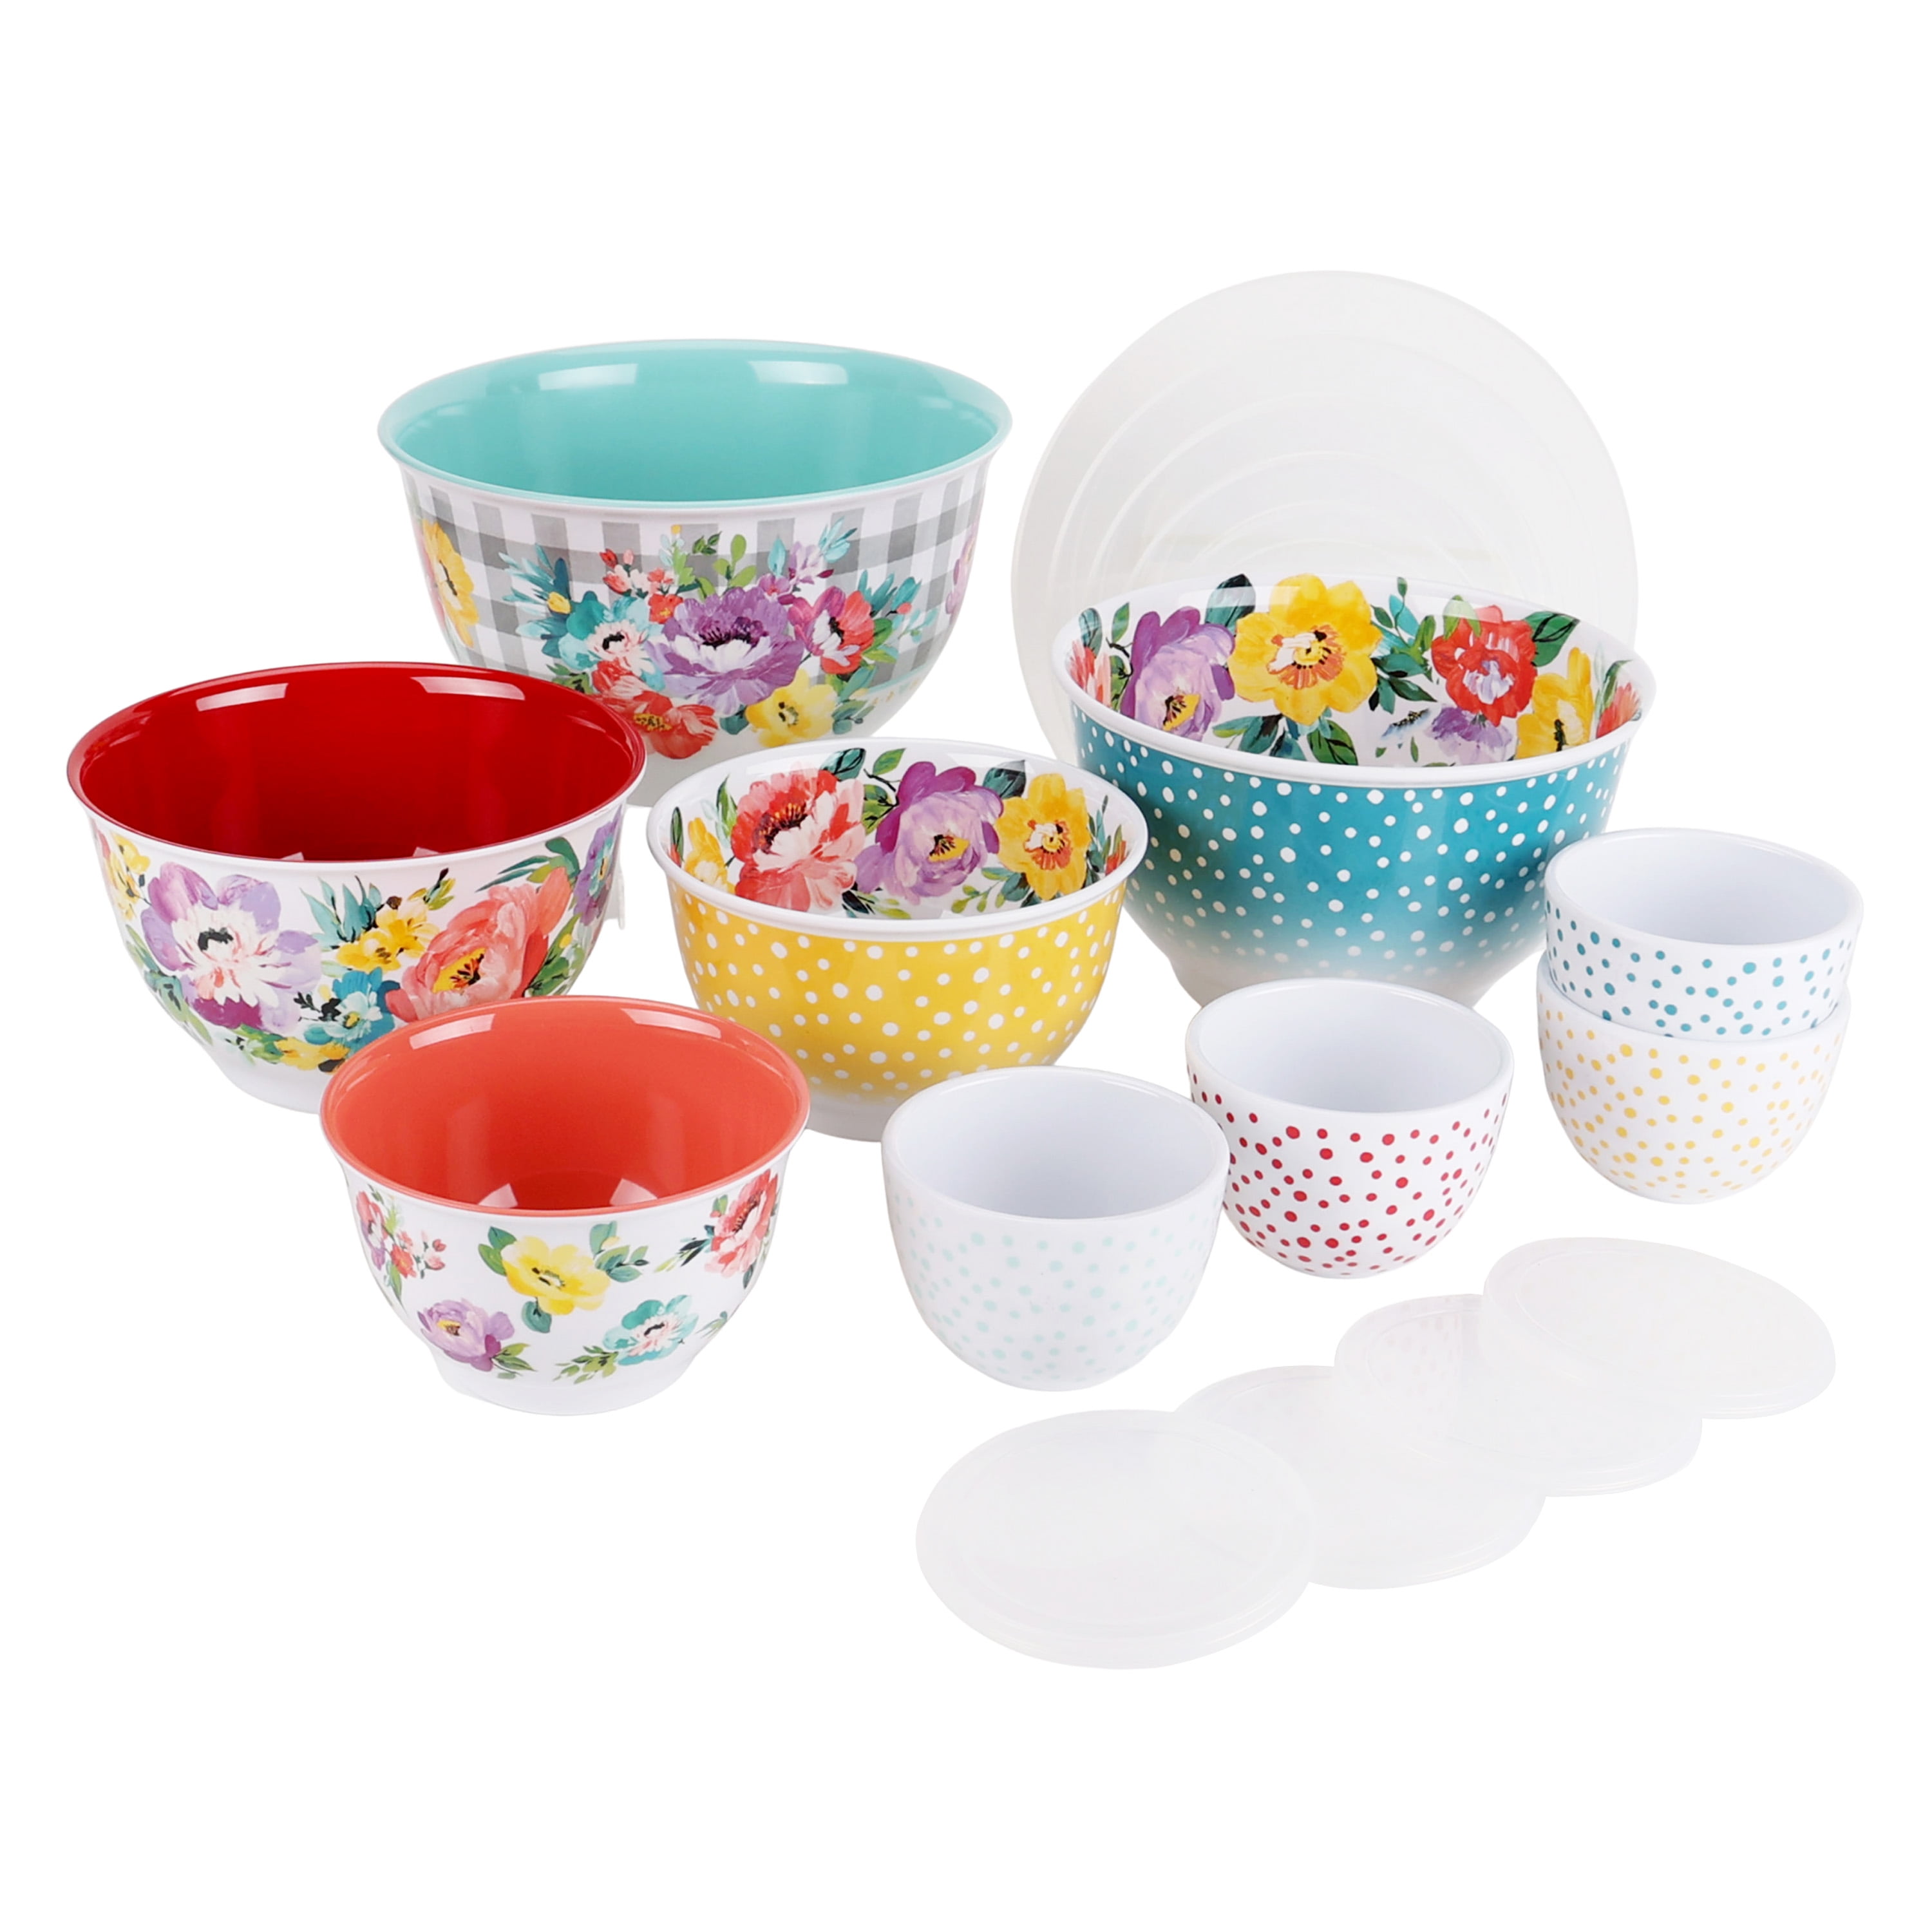 The Pioneer Woman Melamine Timeless Beauty Prep Bowl - 8 Pieces